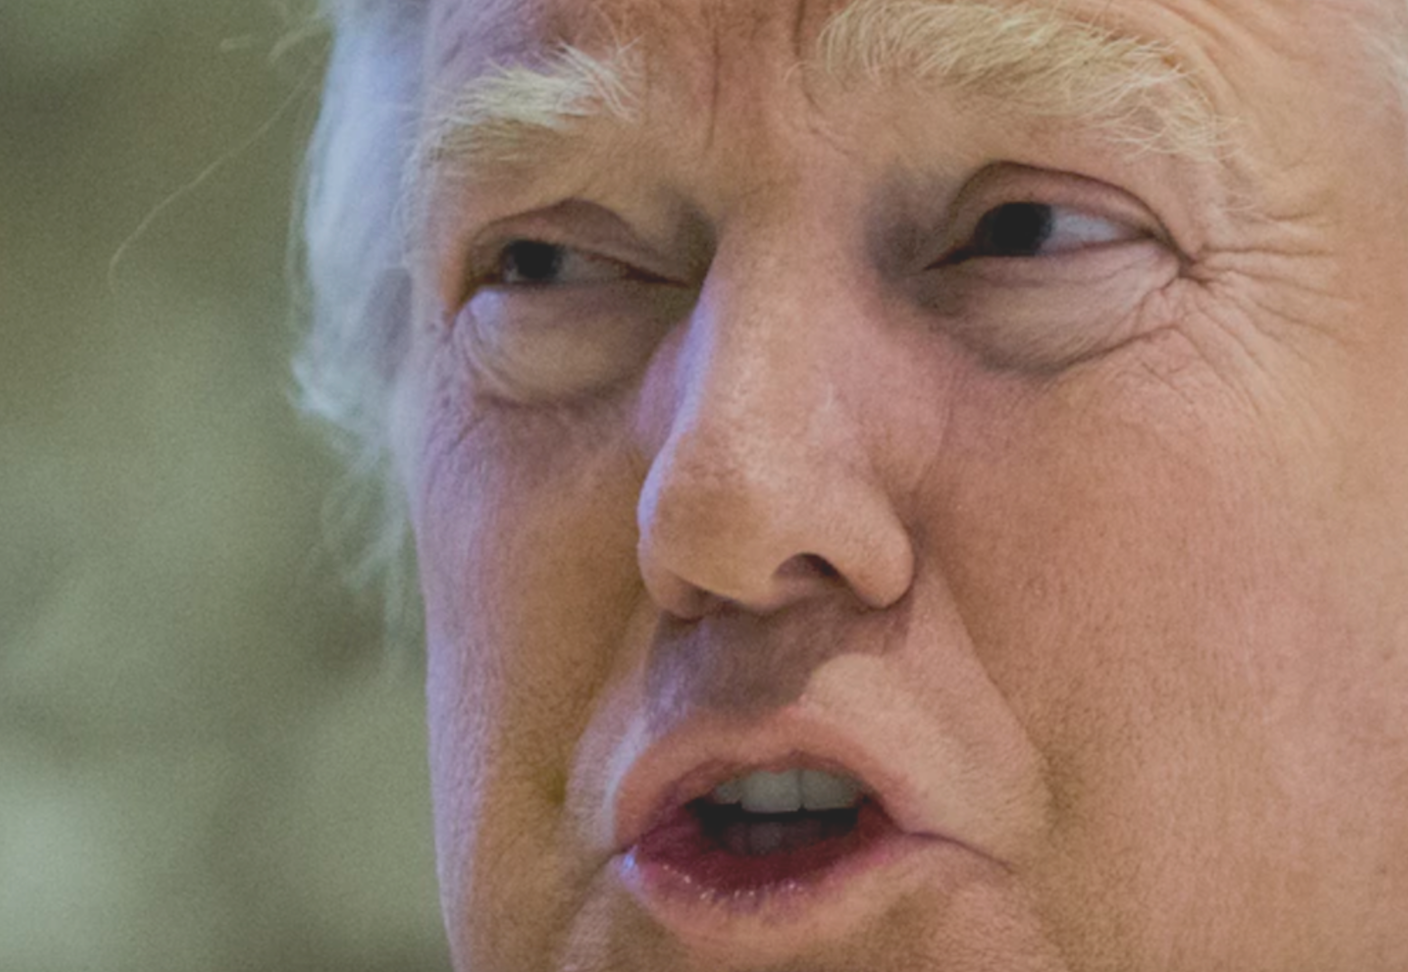 Body Language and Medical Analysis №4221: Why are Donald Trump’s Pupils ...